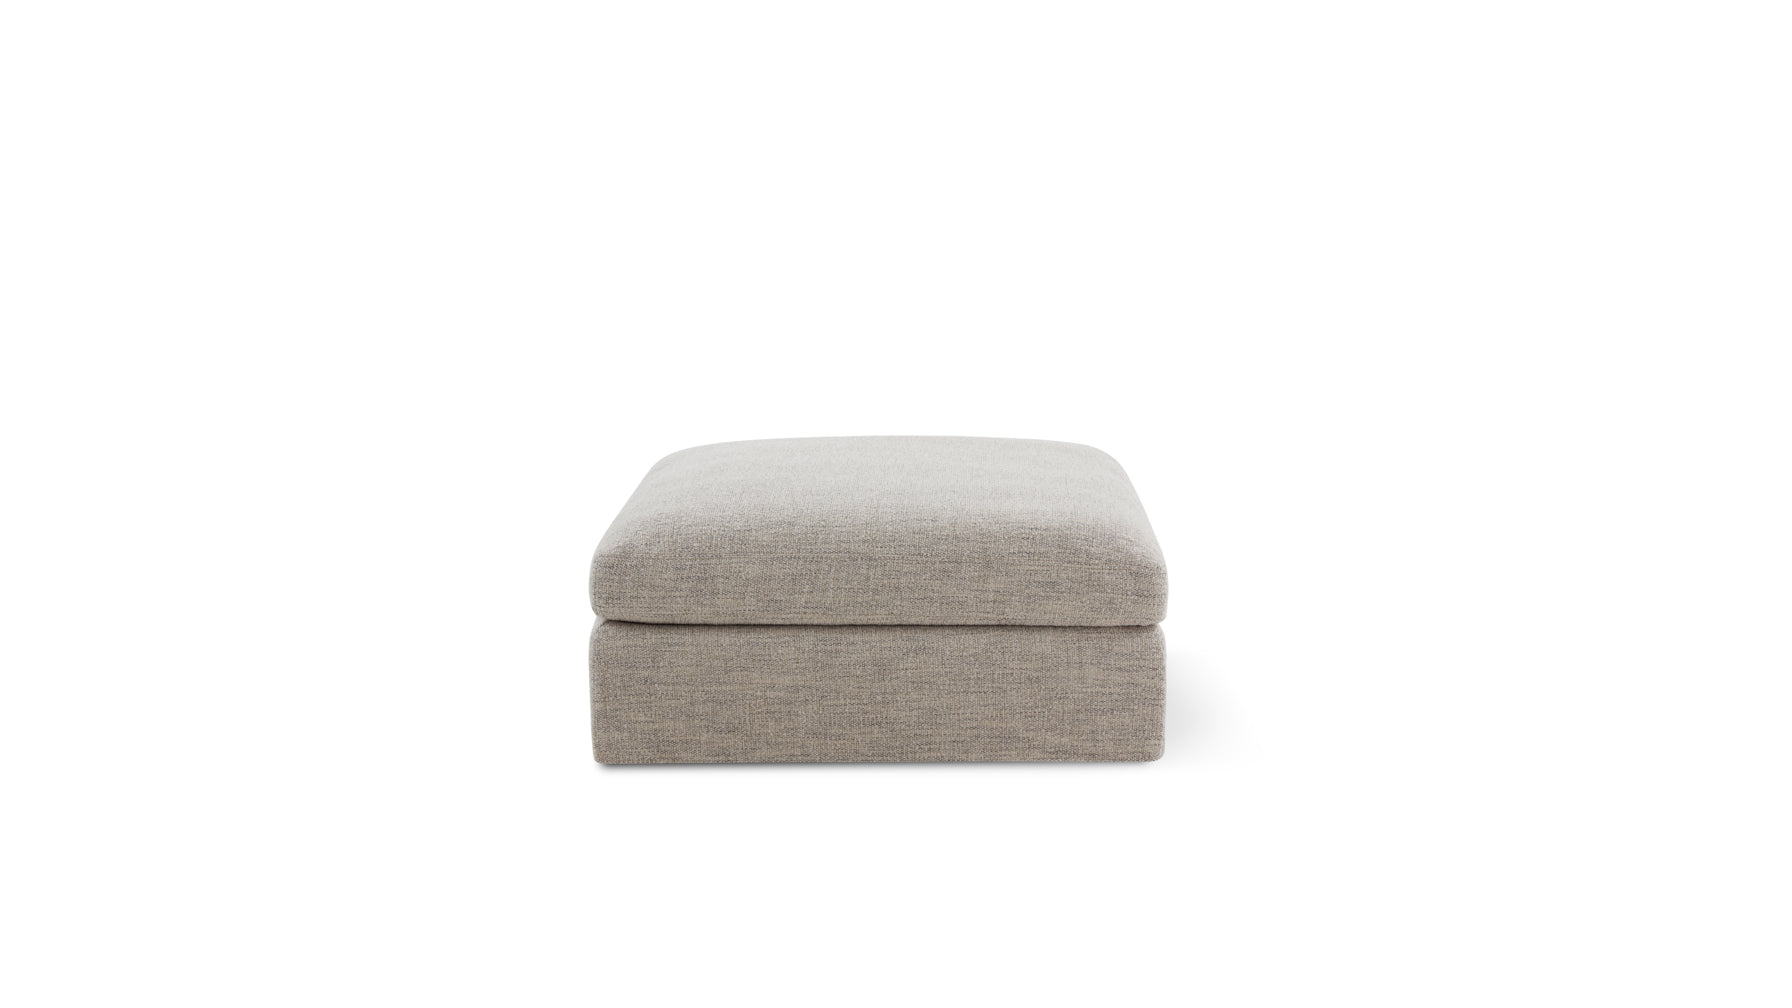 Slipcover - Get Together™ Ottoman, Large, Oatmeal - Image 2